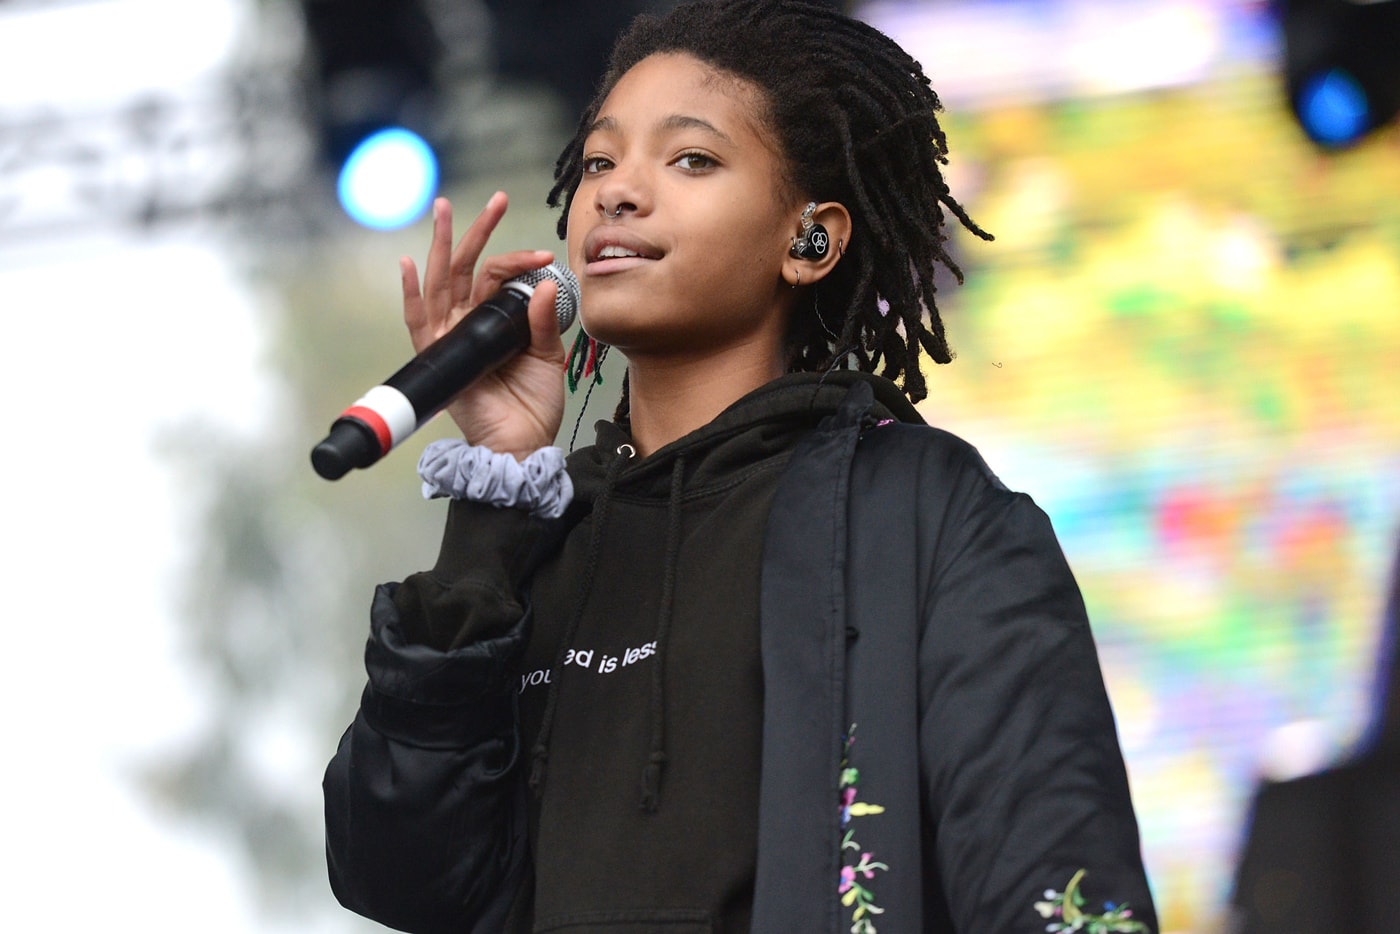 willow-smith-the-fresh-prince-will-smith-summertime-roots-picnic-performance